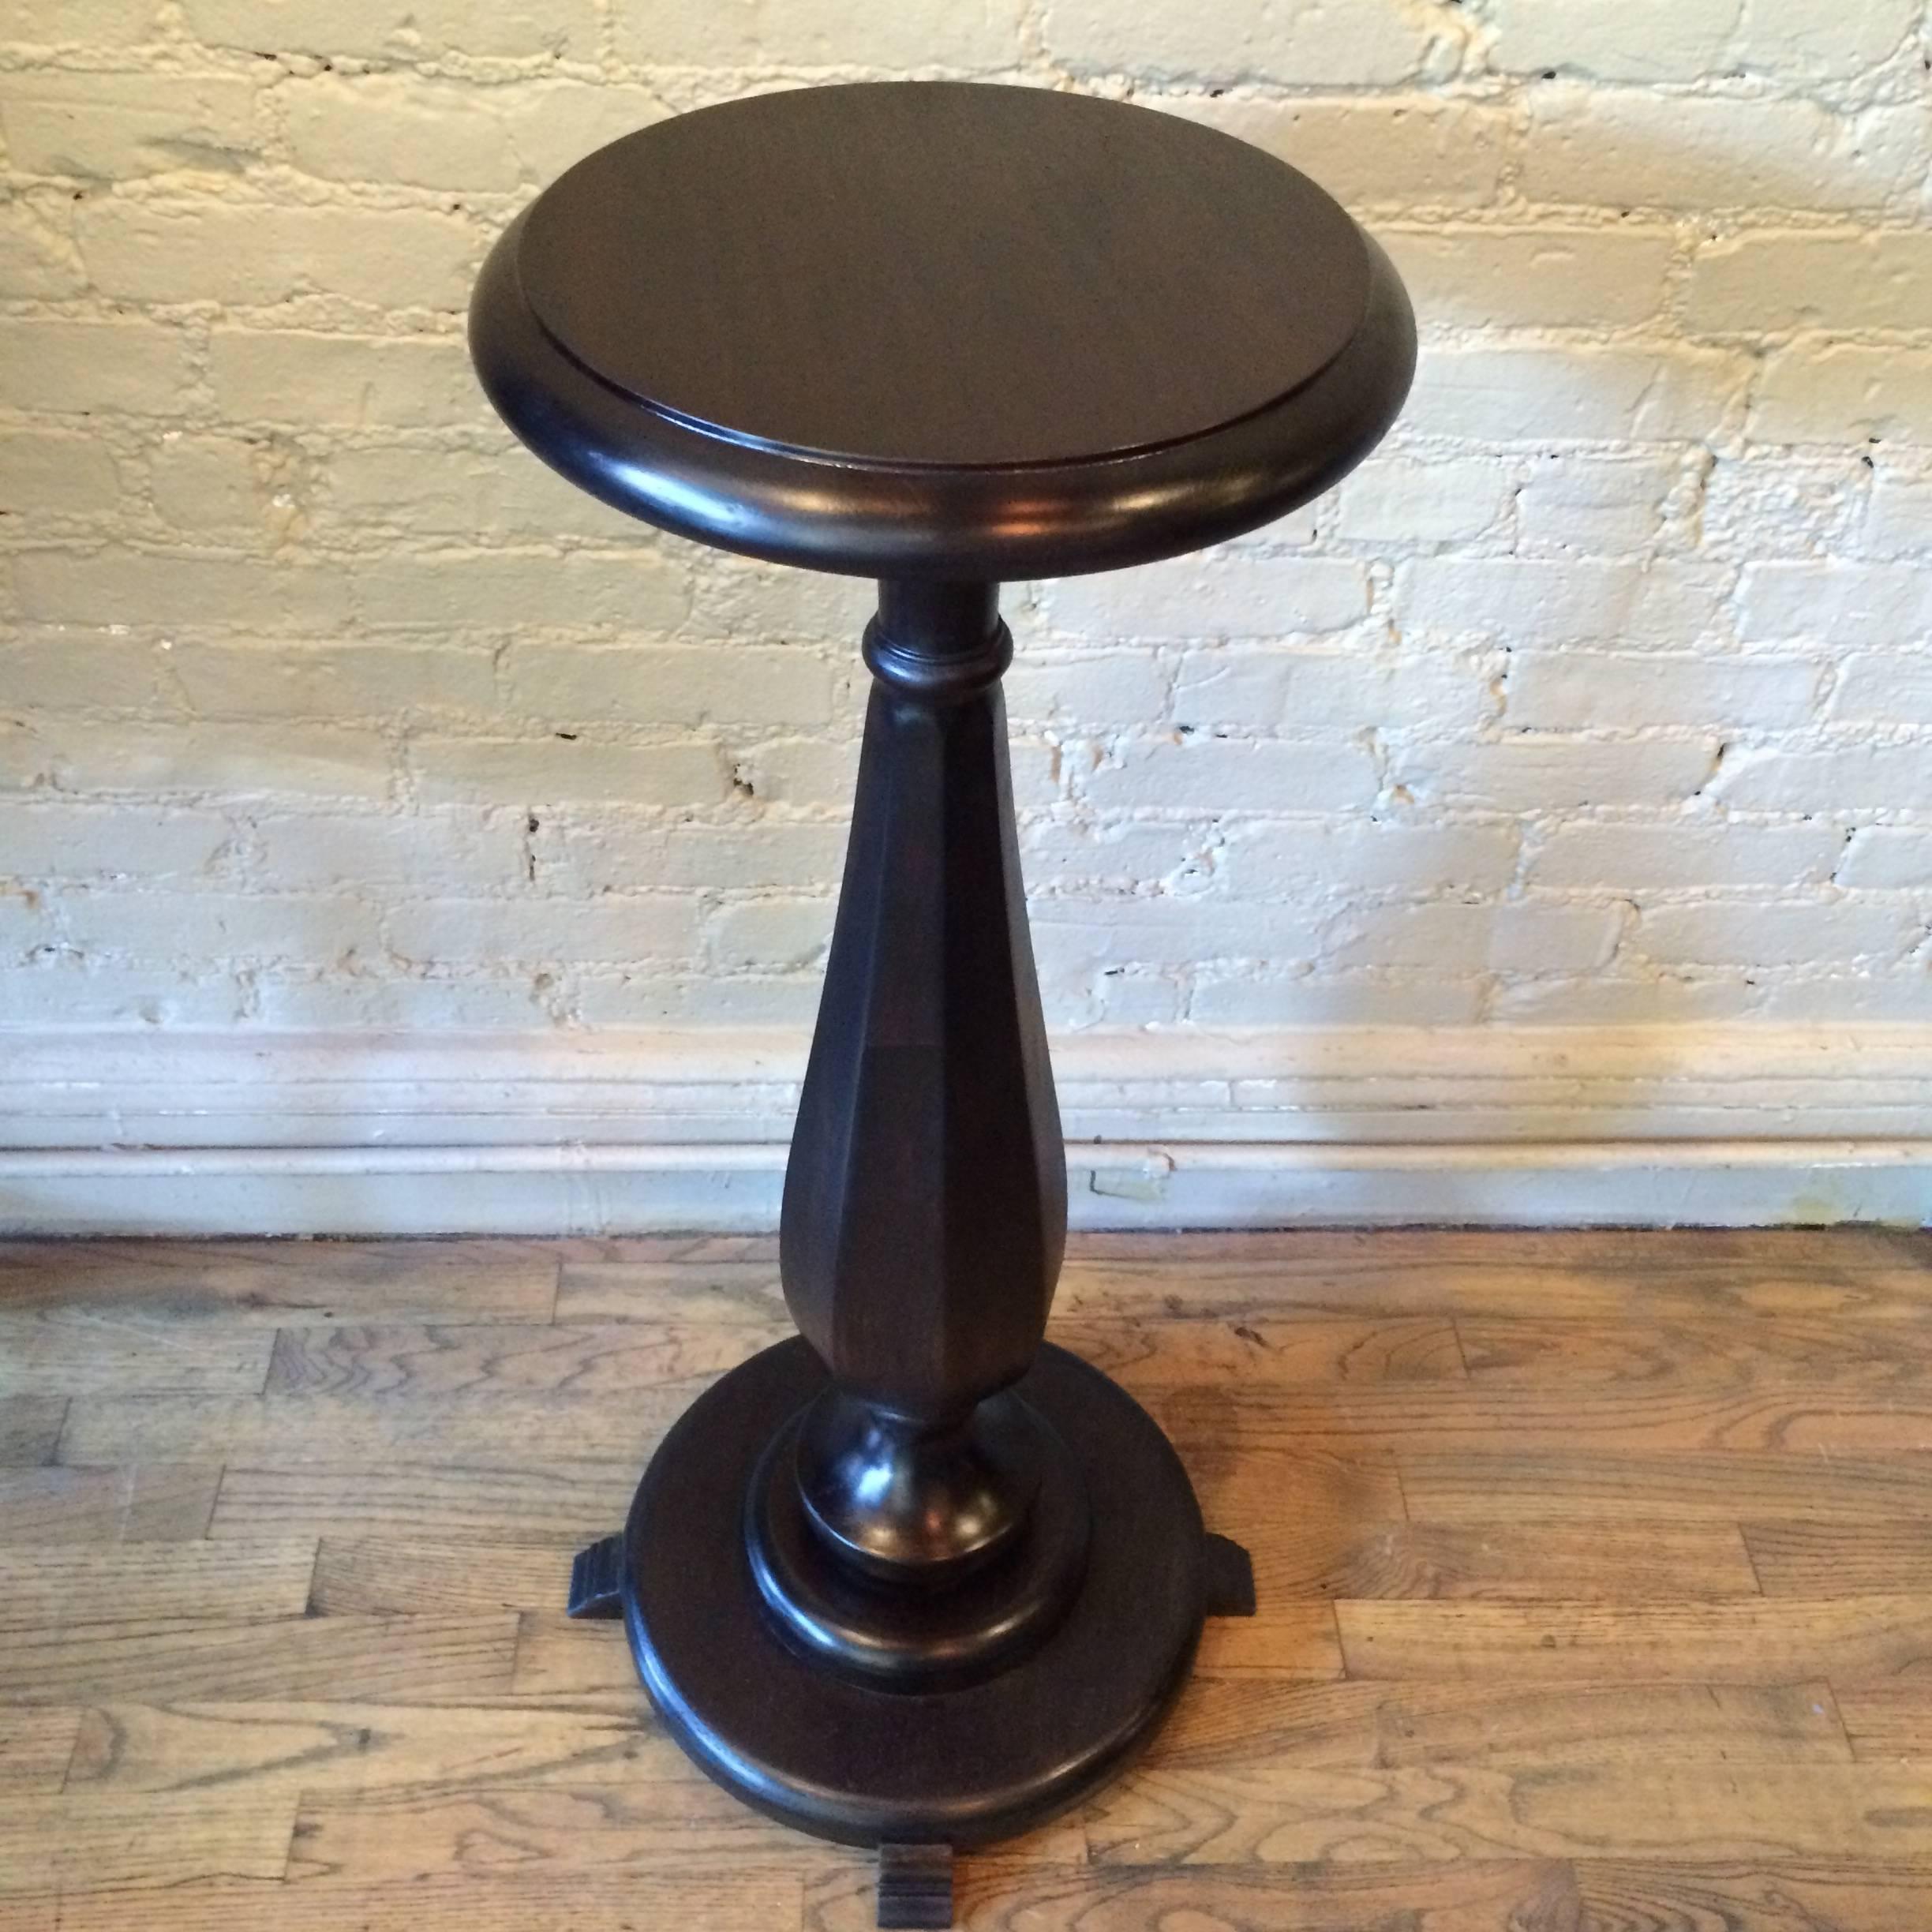 American Late Victorian Ebonized Mahogany Pedestal or Plant Stand